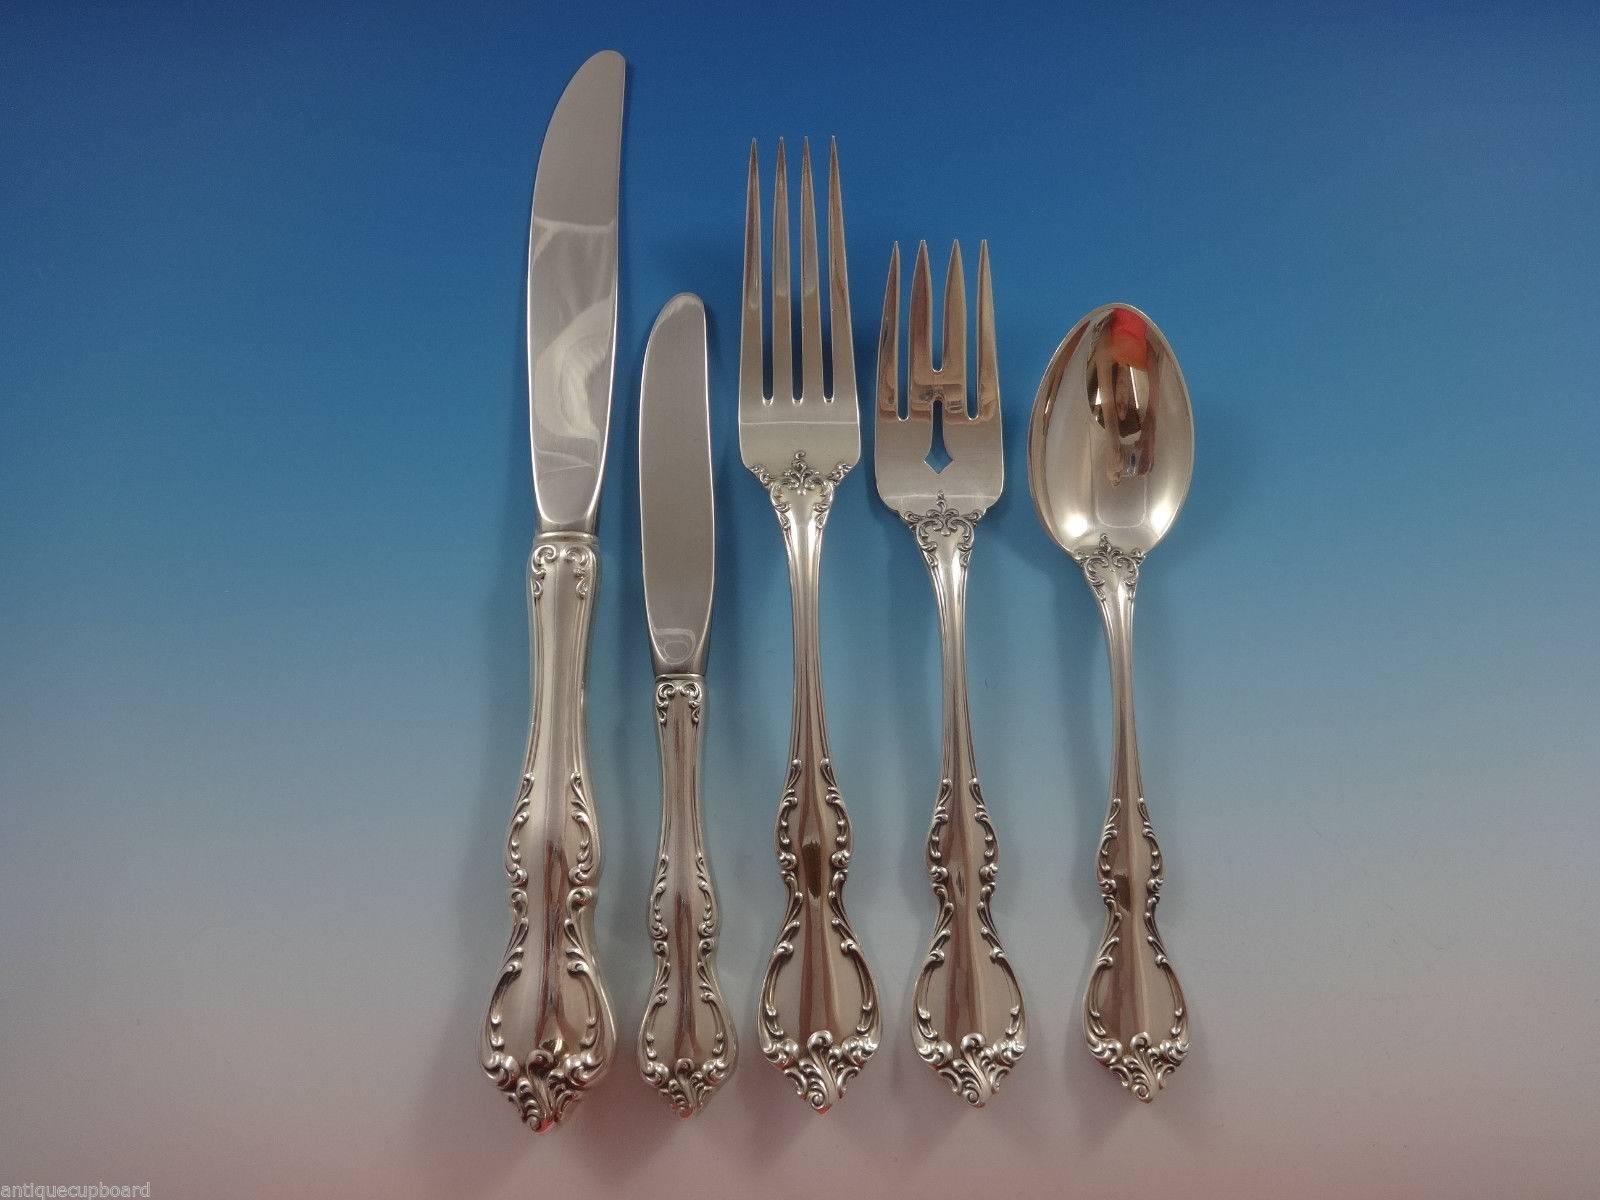 Beautiful Debussy by Towle sterling silver flatware set of 67 pieces. This set includes:

12 knives, 9